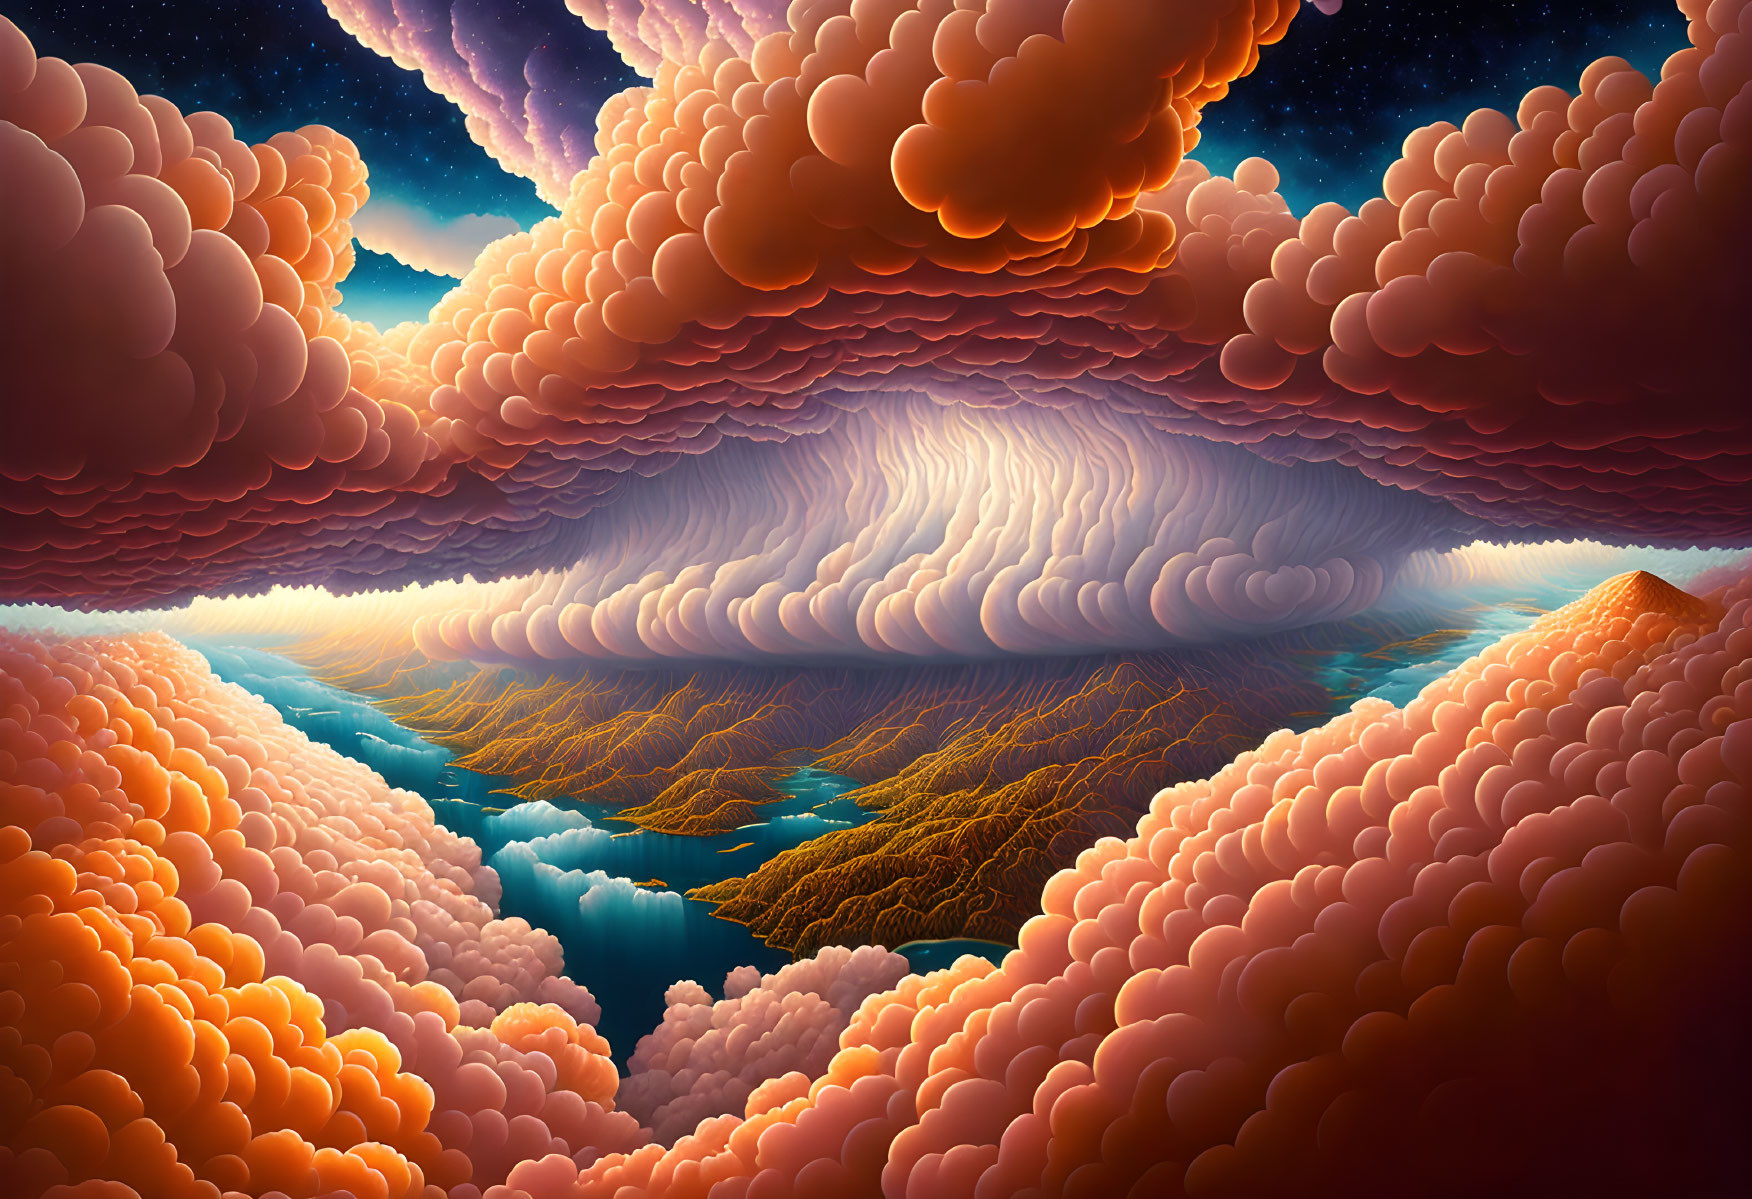 Surreal Landscape with Orange Clouds, Wave-like Formation, Lake, and Starlit Sky